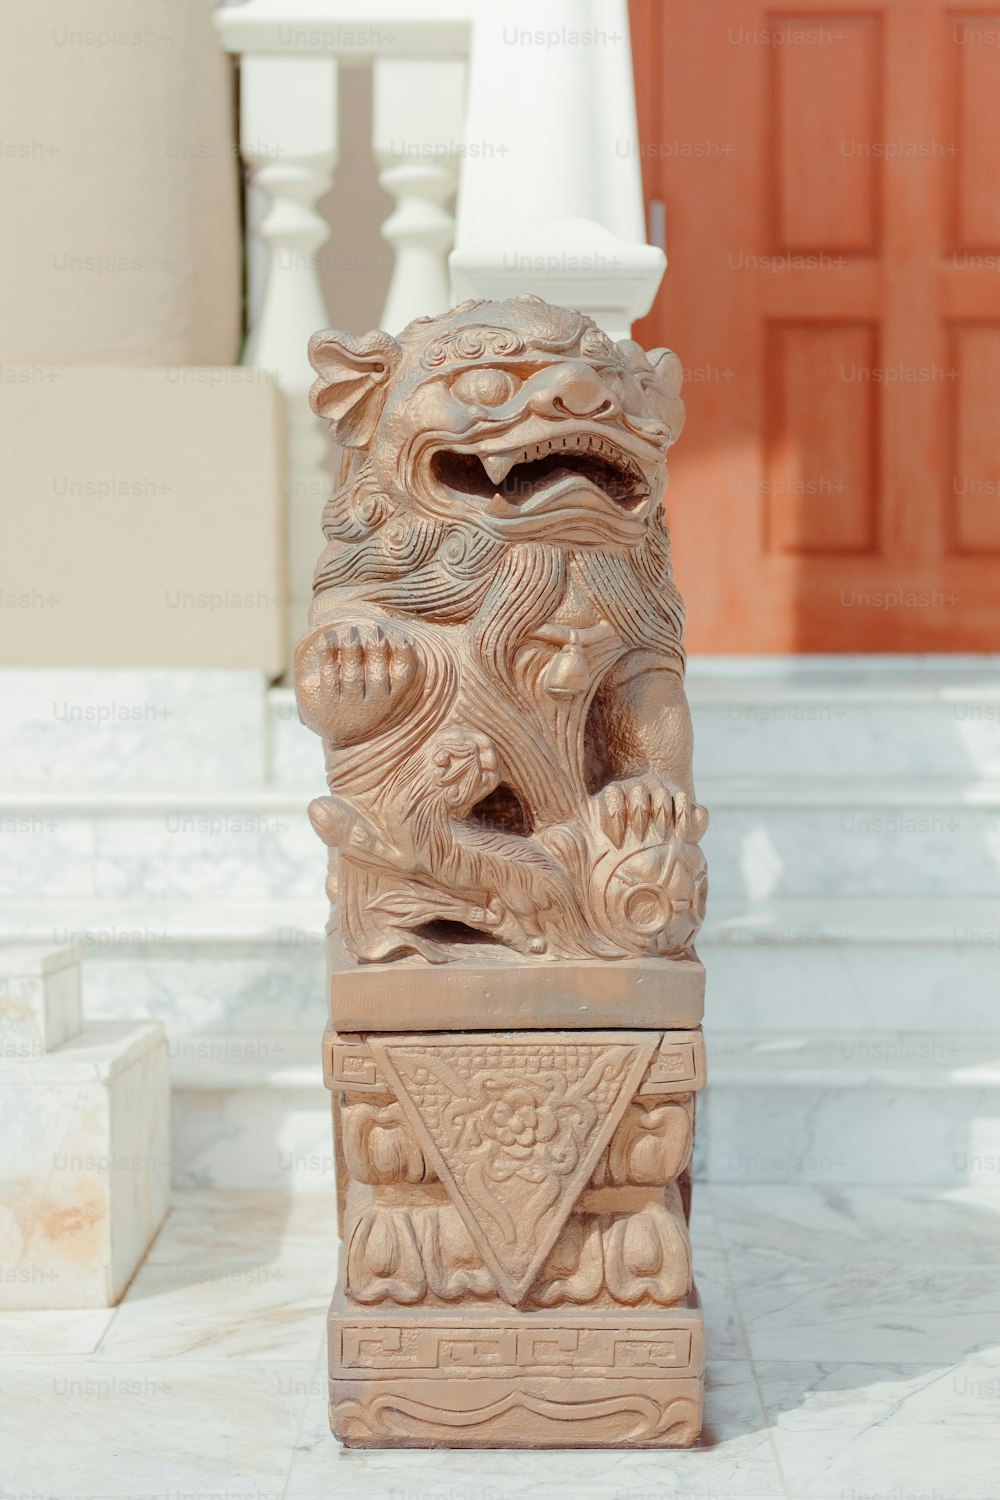 a statue of a dragon on the steps of a building